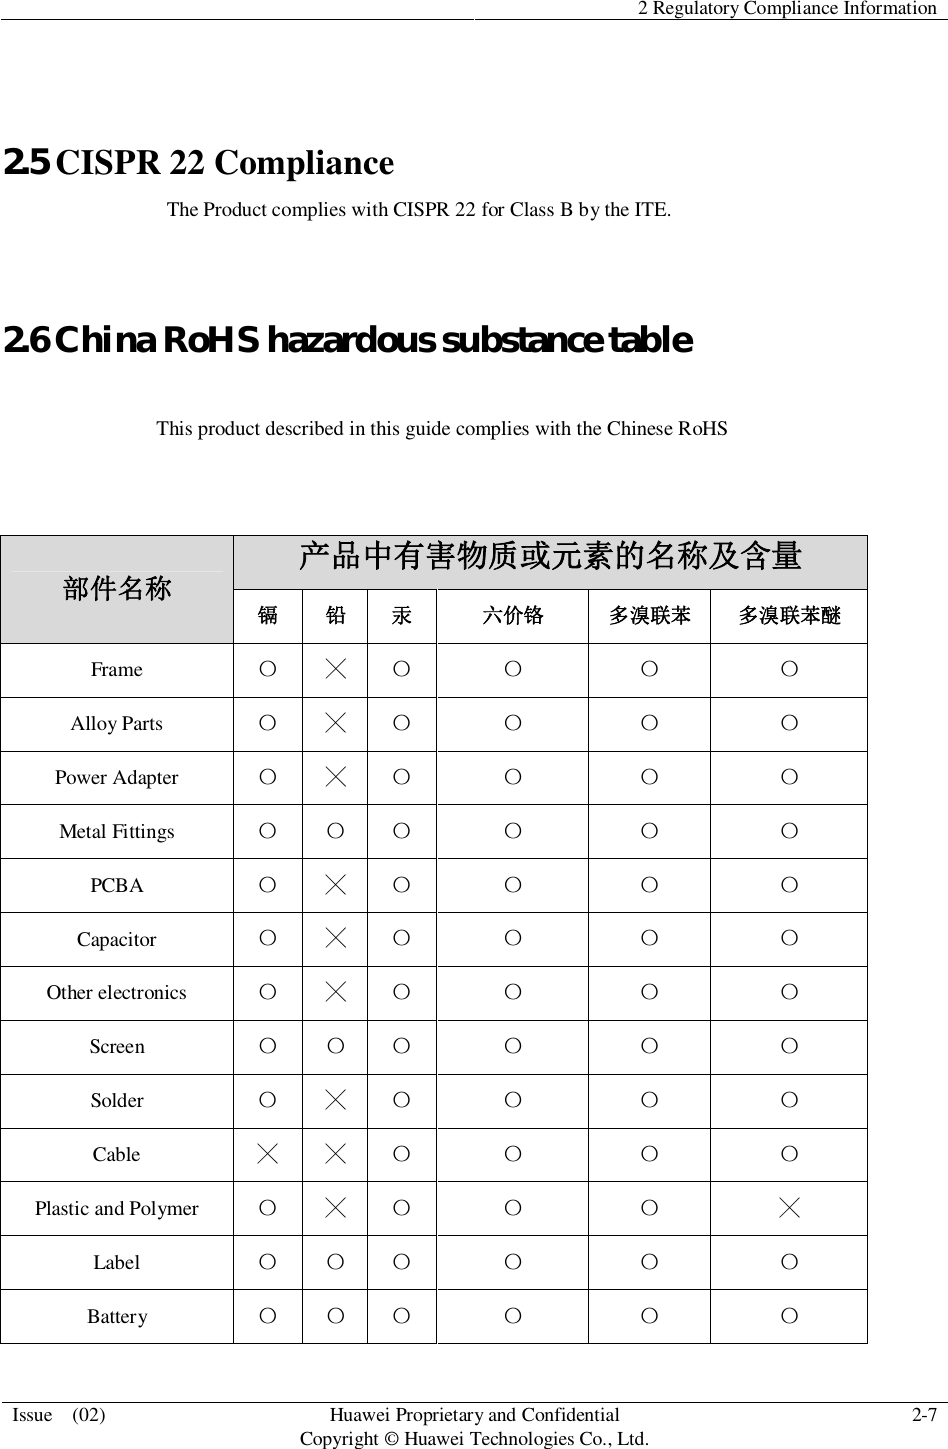 2 Regulatory Compliance InformationIssue  (02) HuaweiProprietary and ConfidentialCopyright © Huawei Technologies Co., Ltd. 2-72.5 CISPR 22 Compliance                 The Product complies with CISPR 22 for Class B by the ITE.2.6 China RoHS hazardous substance table                This product described in this guide complies with the Chinese RoHS󲸙󱜡󰐺󰾚󲩙󱩑󱎵󱜡󲼀󳉺 󳇶 󰦏 󳈝 󰯥󱶅󲀠 󰯥󱶅󲀠󲻋Frame 󳵙  󳵙 󳵙 󳵙 󳵙Alloy Parts 󳵙  󳵙 󳵙 󳵙 󳵙Power Adapter 󳵙  󳵙 󳵙 󳵙 󳵙Metal Fittings 󳵙 󳵙 󳵙 󳵙 󳵙 󳵙PCBA 󳵙  󳵙 󳵙 󳵙 󳵙Capacitor 󳵙  󳵙 󳵙 󳵙 󳵙Other electronics 󳵙  󳵙 󳵙 󳵙 󳵙Screen 󳵙 󳵙 󳵙 󳵙 󳵙 󳵙Solder 󳵙  󳵙 󳵙 󳵙 󳵙Cable   󳵙 󳵙 󳵙 󳵙Plastic and Polymer 󳵙  󳵙 󳵙 󳵙 Label 󳵙 󳵙 󳵙 󳵙 󳵙 󳵙Battery 󳵙 󳵙 󳵙 󳵙 󳵙 󳵙